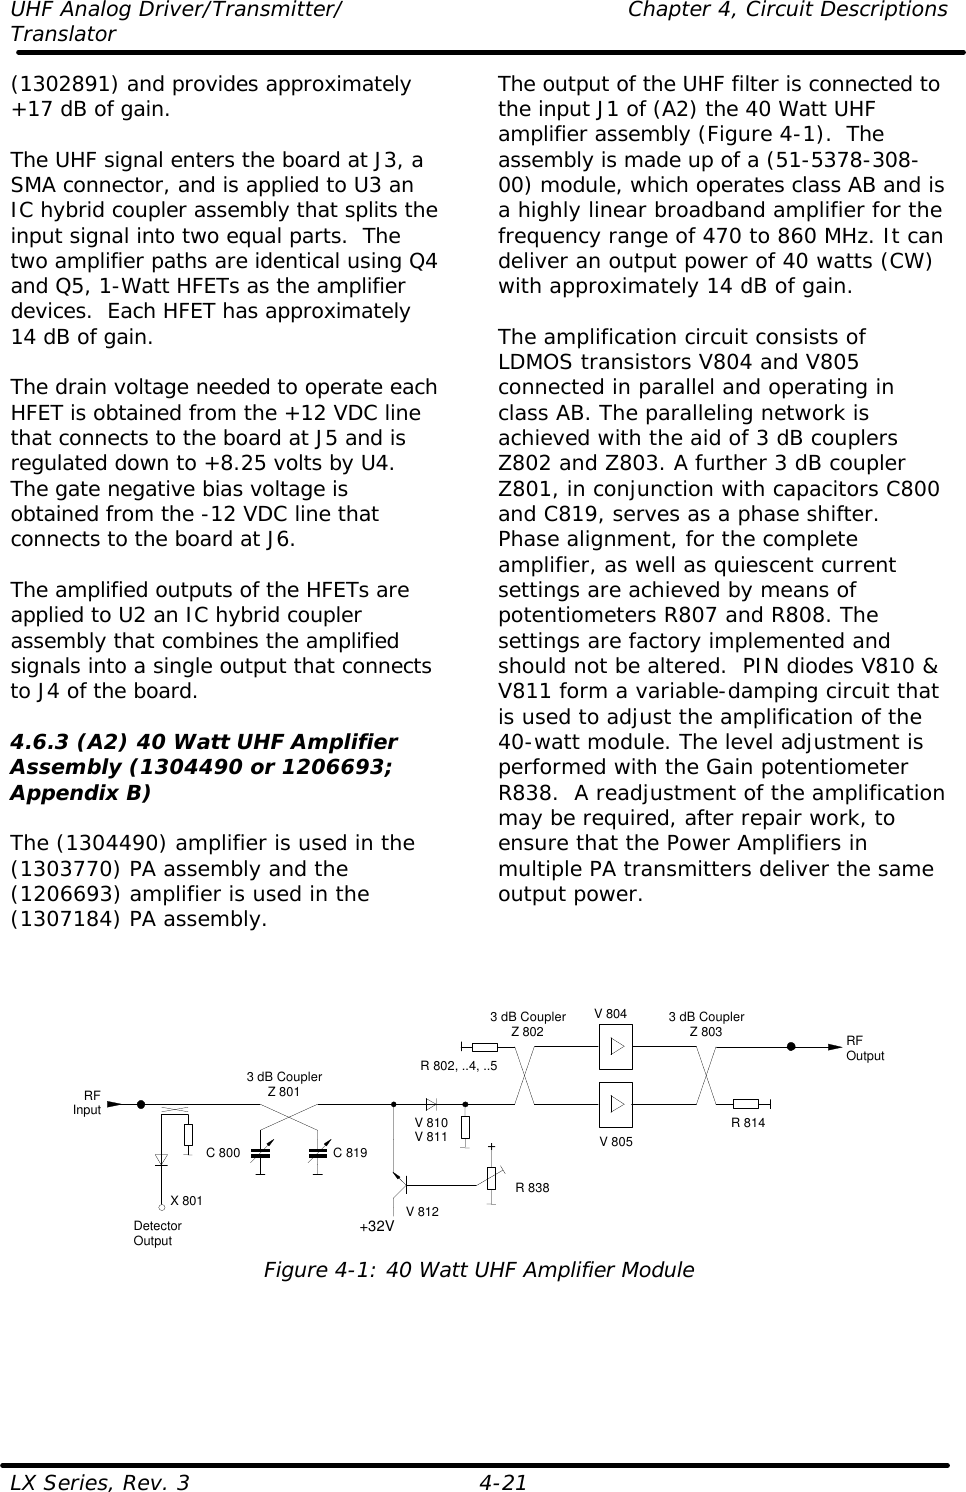 UHF Analog Driver/Transmitter/    Chapter 4, Circuit Descriptions Translator LX Series, Rev. 3    4-21 (1302891) and provides approximately +17 dB of gain.  The UHF signal enters the board at J3, a SMA connector, and is applied to U3 an IC hybrid coupler assembly that splits the input signal into two equal parts.  The two amplifier paths are identical using Q4 and Q5, 1-Watt HFETs as the amplifier devices.  Each HFET has approximately 14 dB of gain.    The drain voltage needed to operate each HFET is obtained from the +12 VDC line that connects to the board at J5 and is regulated down to +8.25 volts by U4.  The gate negative bias voltage is obtained from the -12 VDC line that connects to the board at J6.  The amplified outputs of the HFETs are applied to U2 an IC hybrid coupler assembly that combines the amplified signals into a single output that connects to J4 of the board.  4.6.3 (A2) 40 Watt UHF Amplifier Assembly (1304490 or 1206693; Appendix B)  The (1304490) amplifier is used in the (1303770) PA assembly and the (1206693) amplifier is used in the (1307184) PA assembly.  The output of the UHF filter is connected to the input J1 of (A2) the 40 Watt UHF amplifier assembly (Figure 4-1).  The assembly is made up of a (51-5378-308-00) module, which operates class AB and is a highly linear broadband amplifier for the frequency range of 470 to 860 MHz. It can deliver an output power of 40 watts (CW) with approximately 14 dB of gain.  The amplification circuit consists of LDMOS transistors V804 and V805 connected in parallel and operating in class AB. The paralleling network is achieved with the aid of 3 dB couplers Z802 and Z803. A further 3 dB coupler Z801, in conjunction with capacitors C800 and C819, serves as a phase shifter. Phase alignment, for the complete amplifier, as well as quiescent current settings are achieved by means of potentiometers R807 and R808. The settings are factory implemented and should not be altered.  PIN diodes V810 &amp; V811 form a variable-damping circuit that is used to adjust the amplification of the 40-watt module. The level adjustment is performed with the Gain potentiometer R838.  A readjustment of the amplification may be required, after repair work, to ensure that the Power Amplifiers in multiple PA transmitters deliver the same output power.     V 805V 8043 dB CouplerZ 801RFOutputRFInput R 814R 802, ..4, ..5C 800 C 819DetectorOutputX 801+32V+R 838V 810V 811V 8123 dB CouplerZ 802 3 dB CouplerZ 803 Figure 4-1: 40 Watt UHF Amplifier Module  